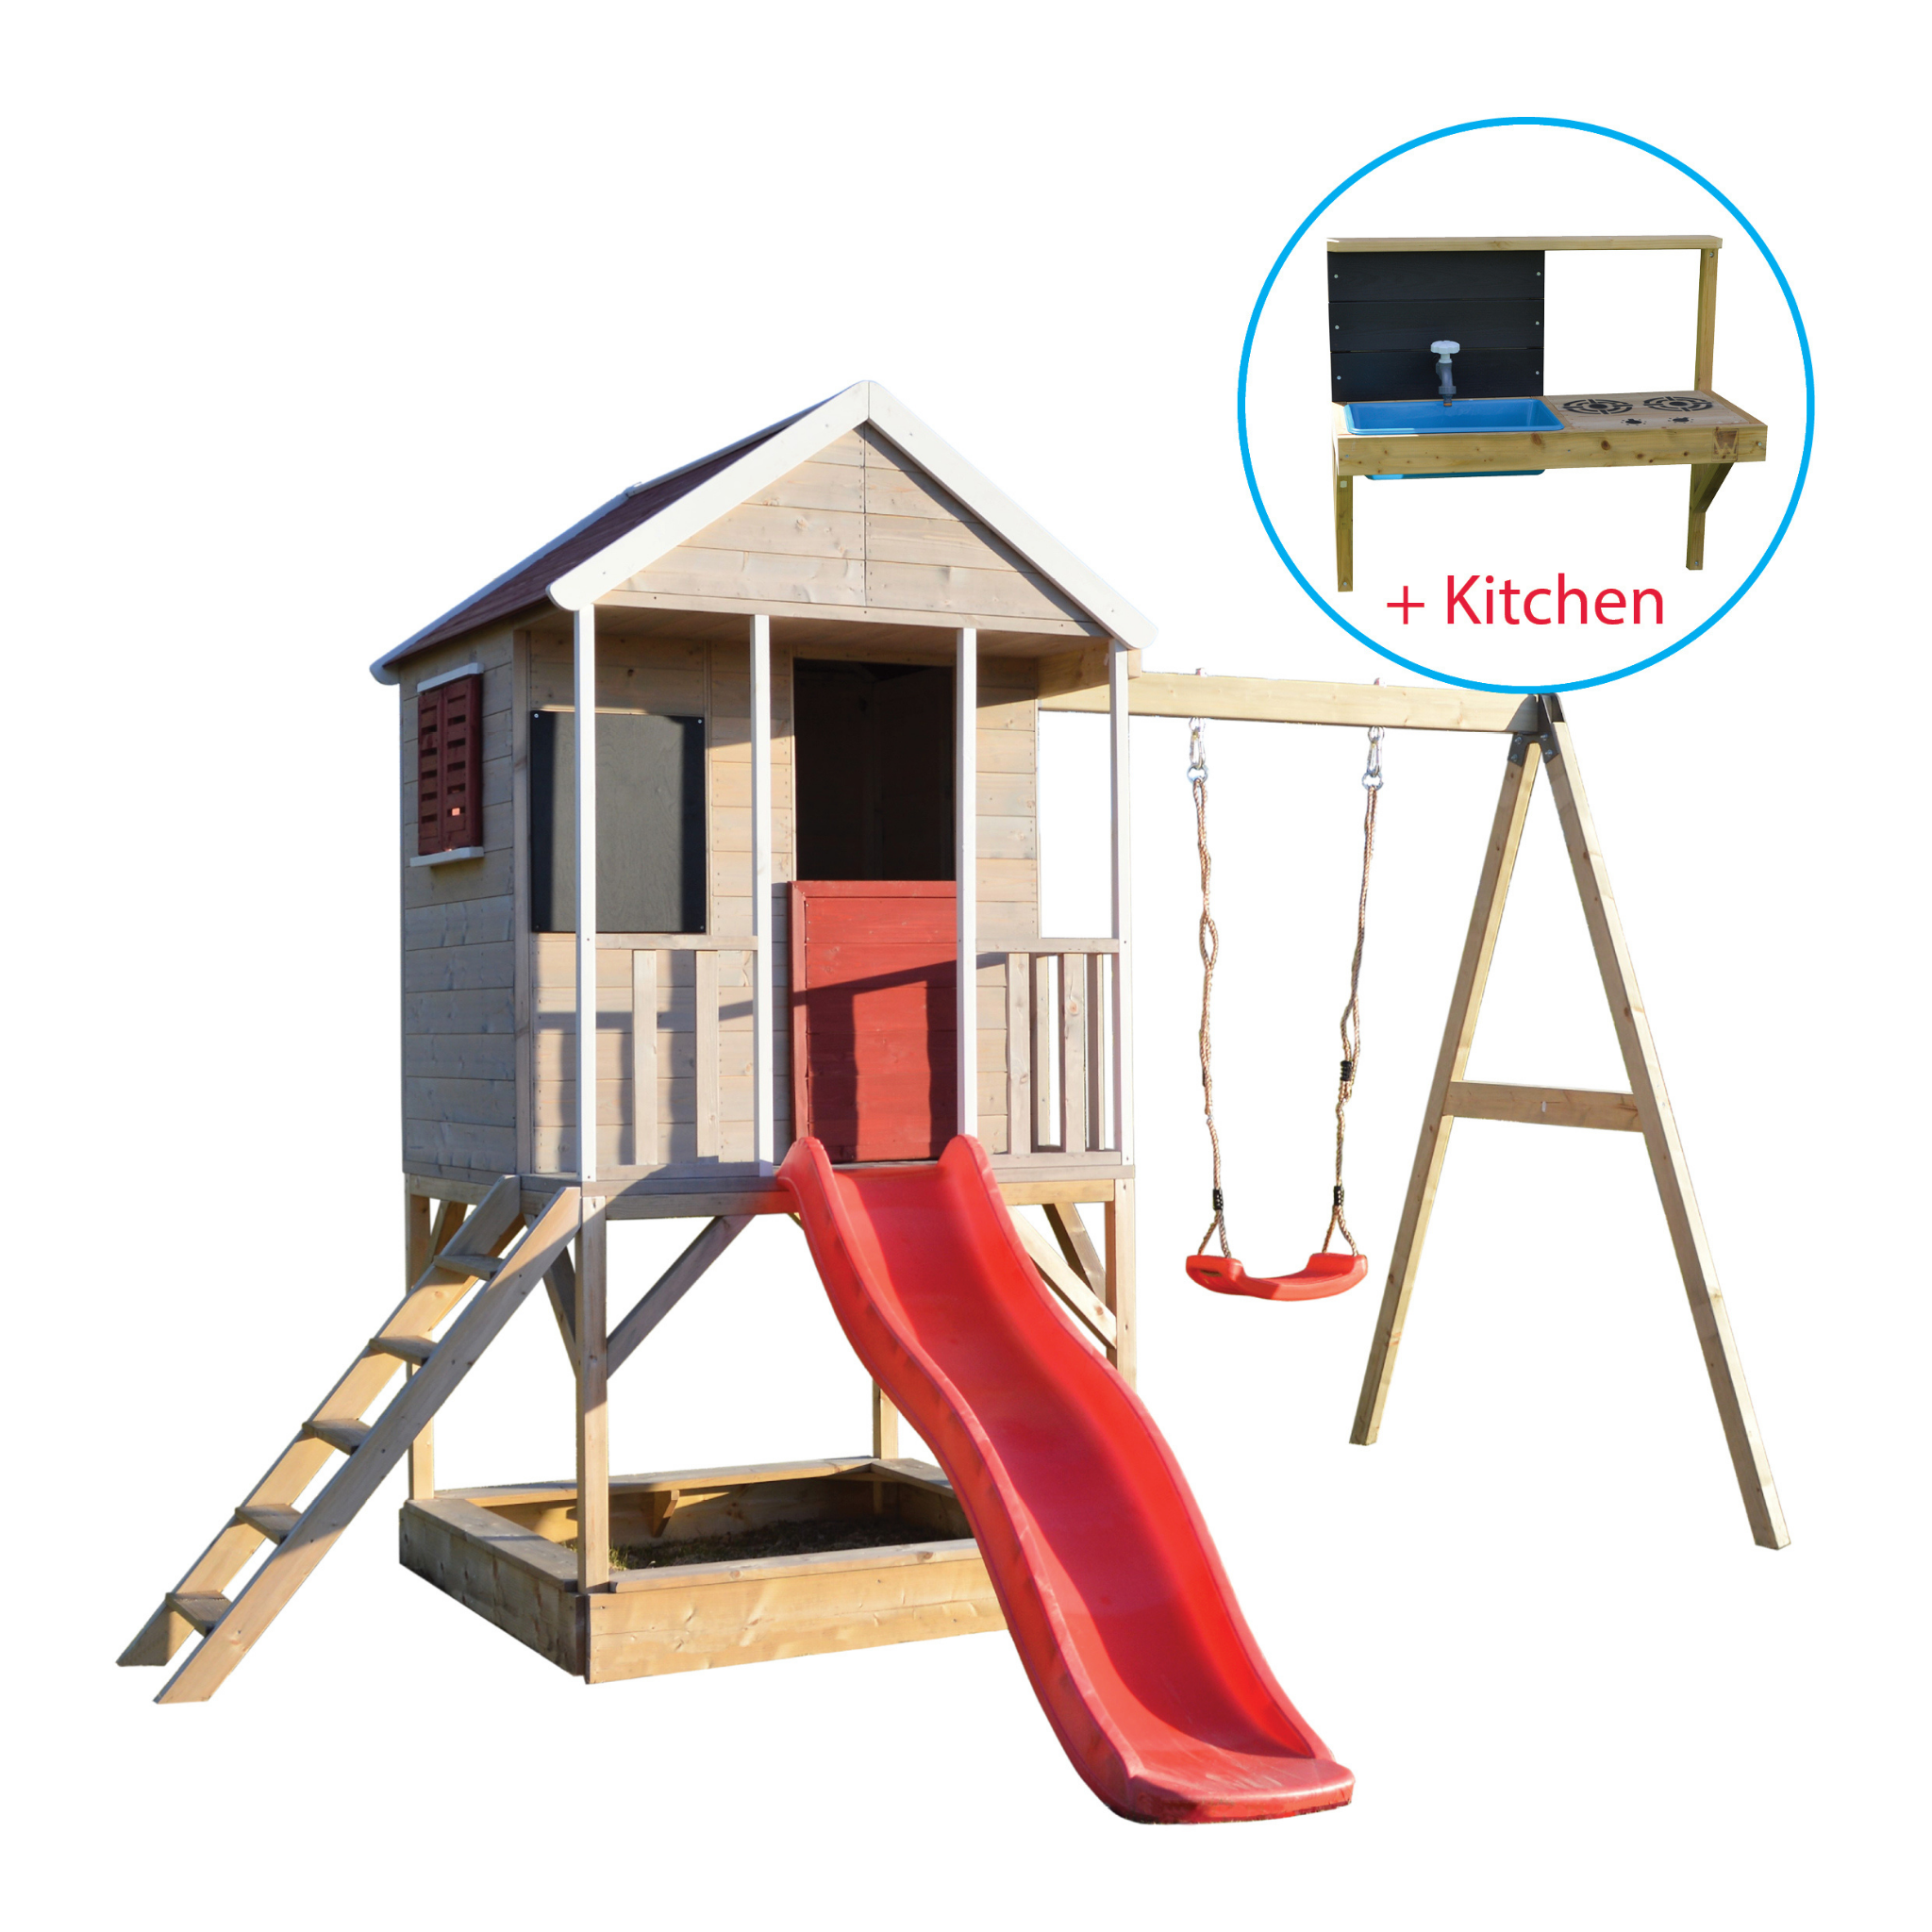 M9R-K Summer Adventure House with Platform, Slide and Single Swing + Kitchen Attachment